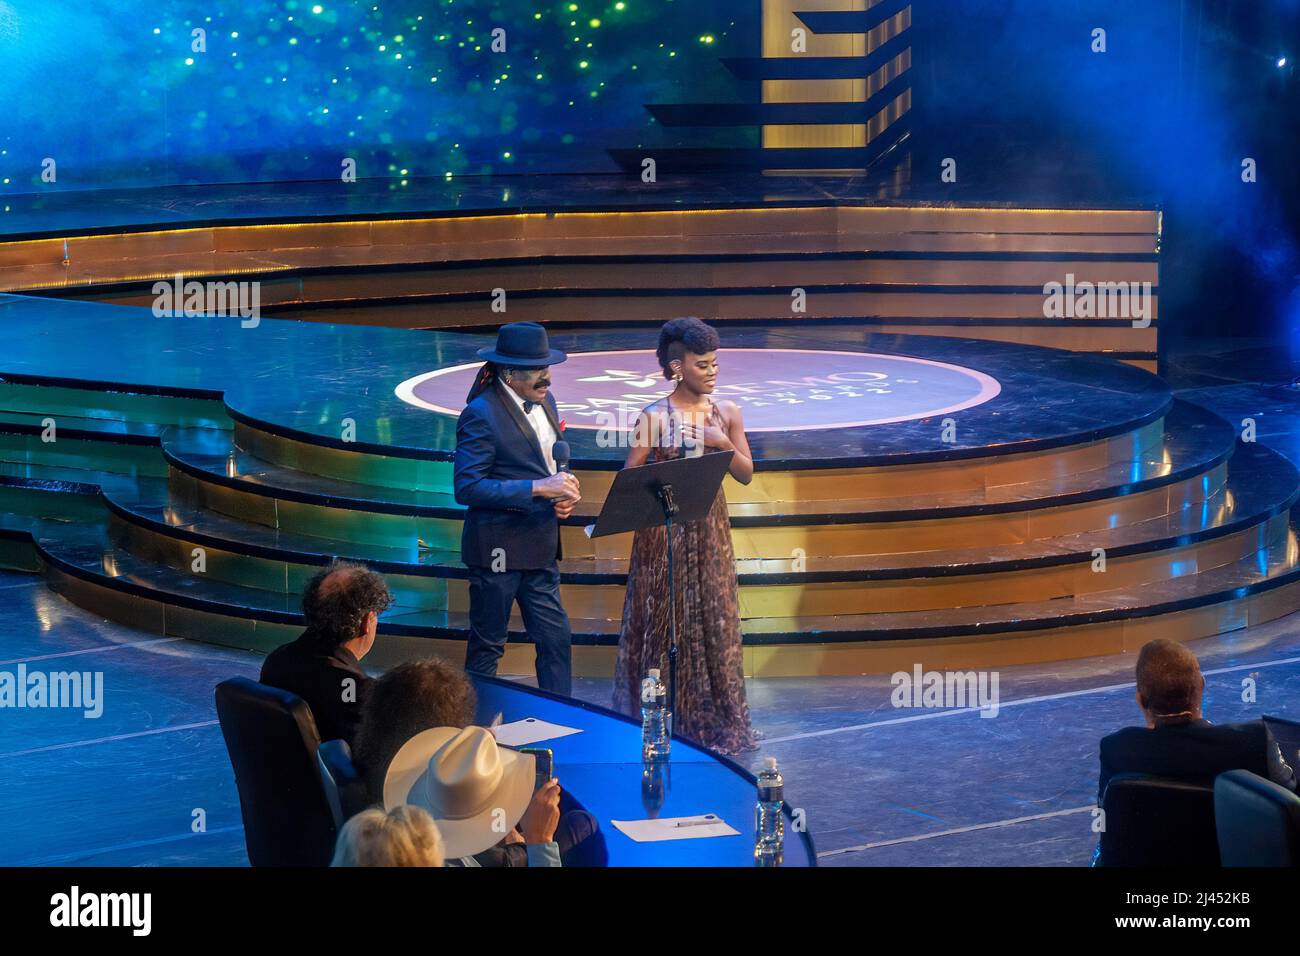 The finalist singer Diana Enrique performing with Pedrito Calvo on the stage of the Avellaneda Hall in the National Theater of Cuba. The San Remo Musi Stock Photo